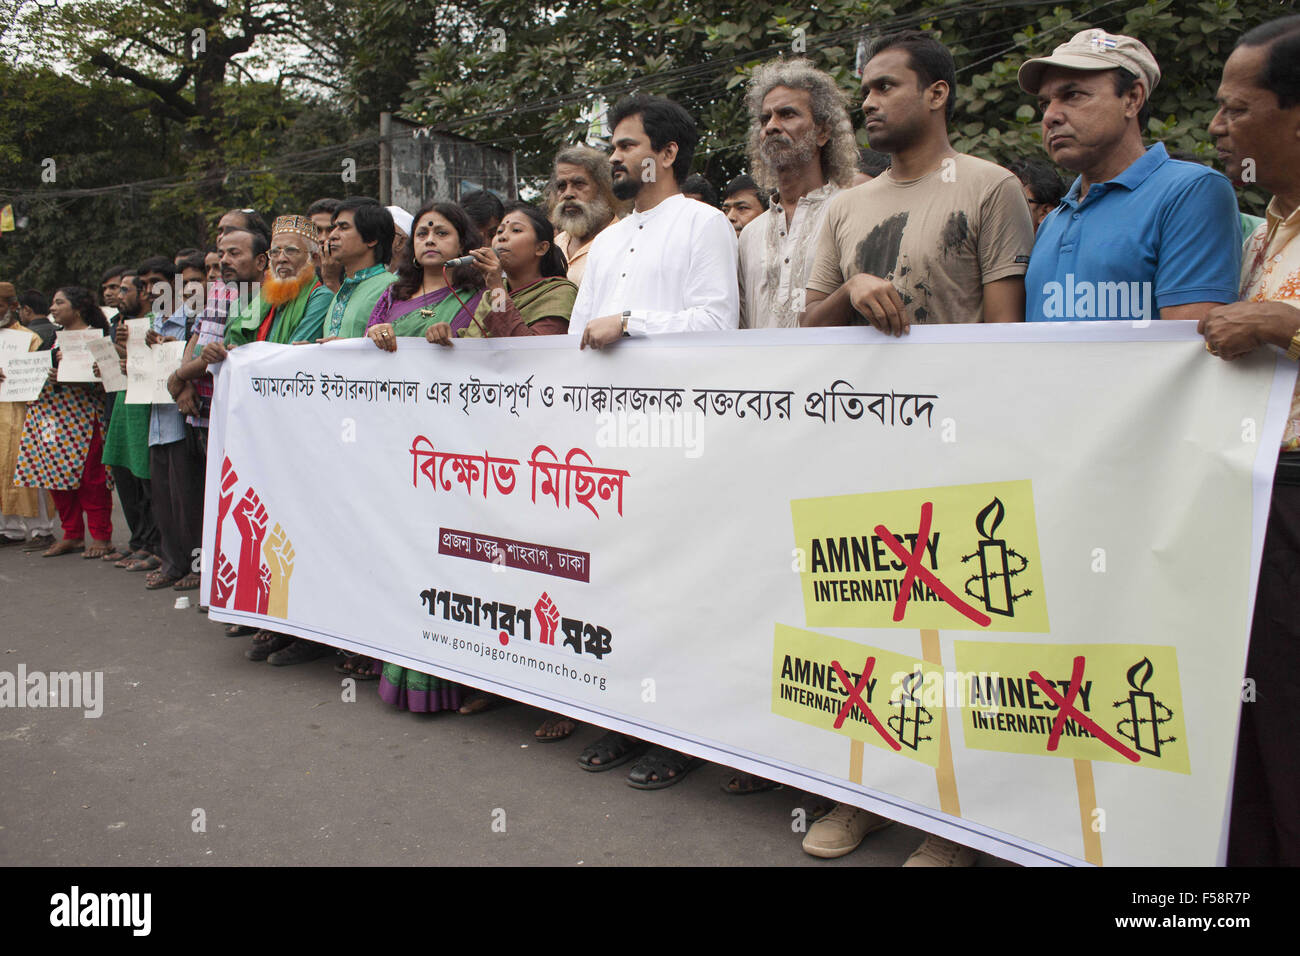 Dhaka, Bangladesh. 30th Oct, 2015. Ganajagaran Mancha held a rally protesting the statement by Amnesty International at Shahbagh in capital Dhaka, Bangladesh. Ganajagaran Mancha has slammed the Amnesty International (AI) for questioning the International Crimes Tribunal's (ICT) trial processes in Bangladesh. Senior Jamaat leader Ali Ahsan Mohammad Mojaheed and BNP leader Salauddin Quader Chowdhury had been sentenced to death for their war crimes during the Bangladesh liberation war at 1971. Amnesty International on Wednesday said two opposition politicians in Bangladesh face death penalty Stock Photo